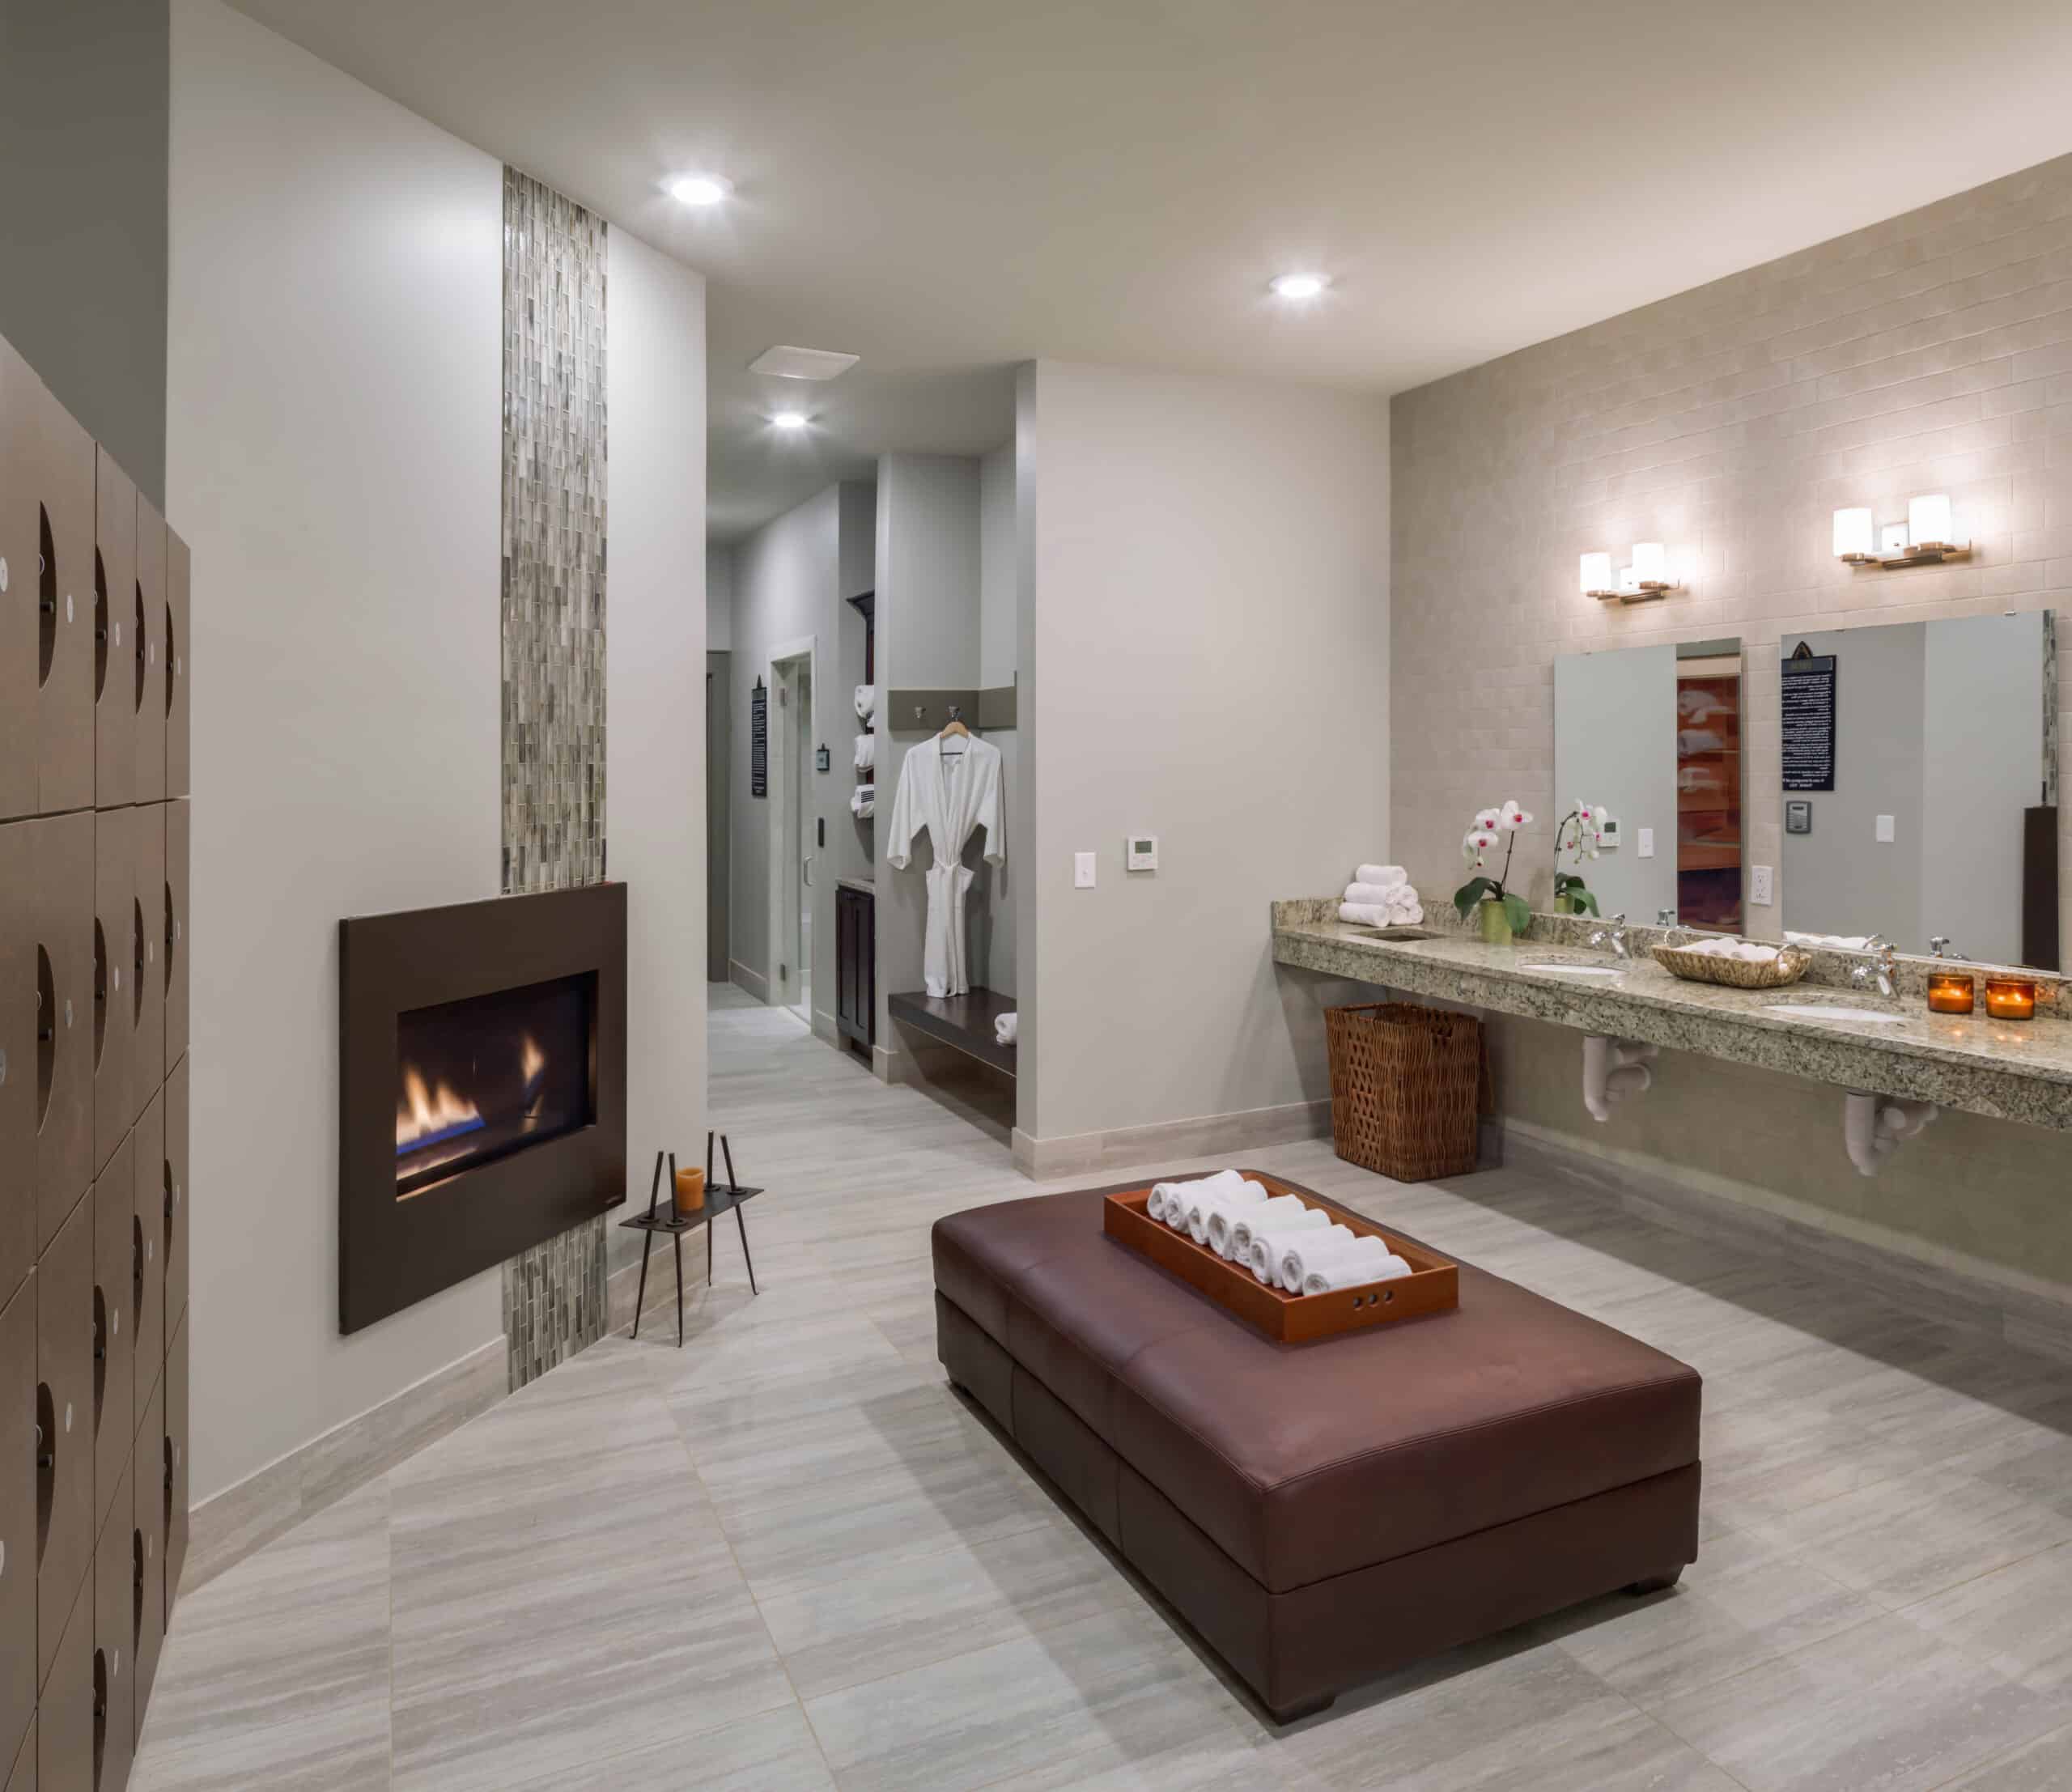 A bathroom with two sinks and a fireplace.